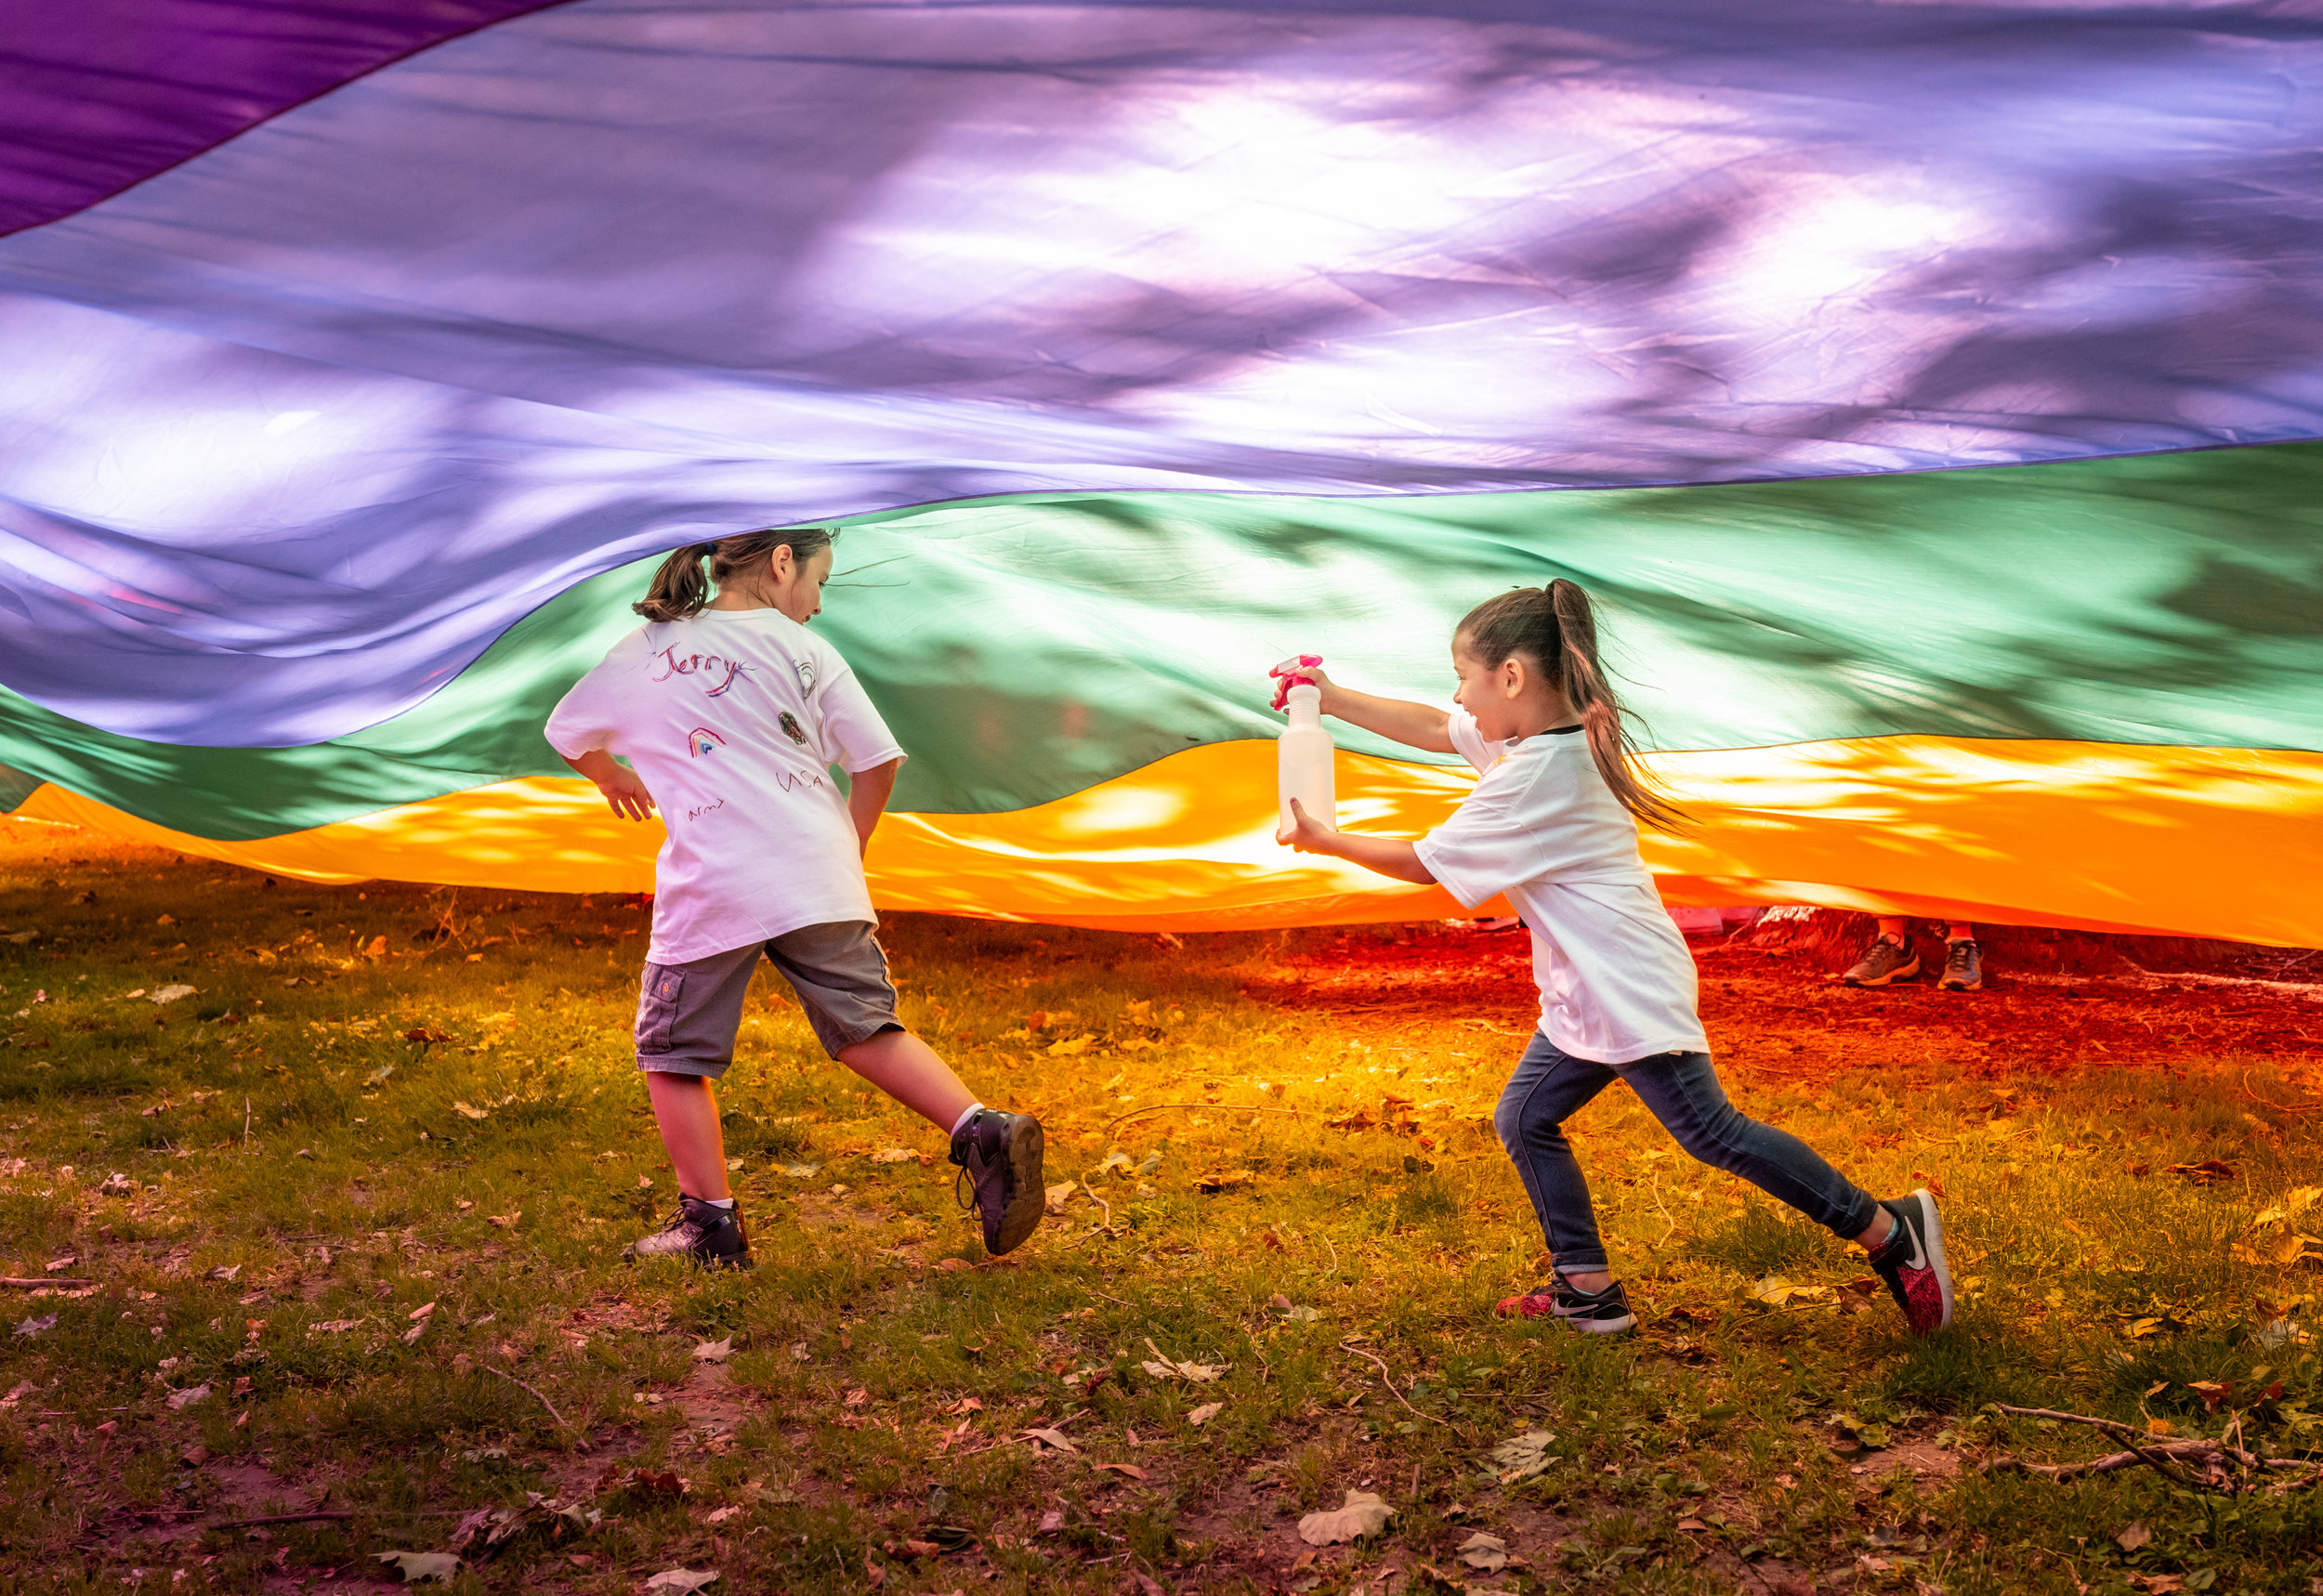 Children playing under a giant pride flag during the annual pride march in Sacramento, California